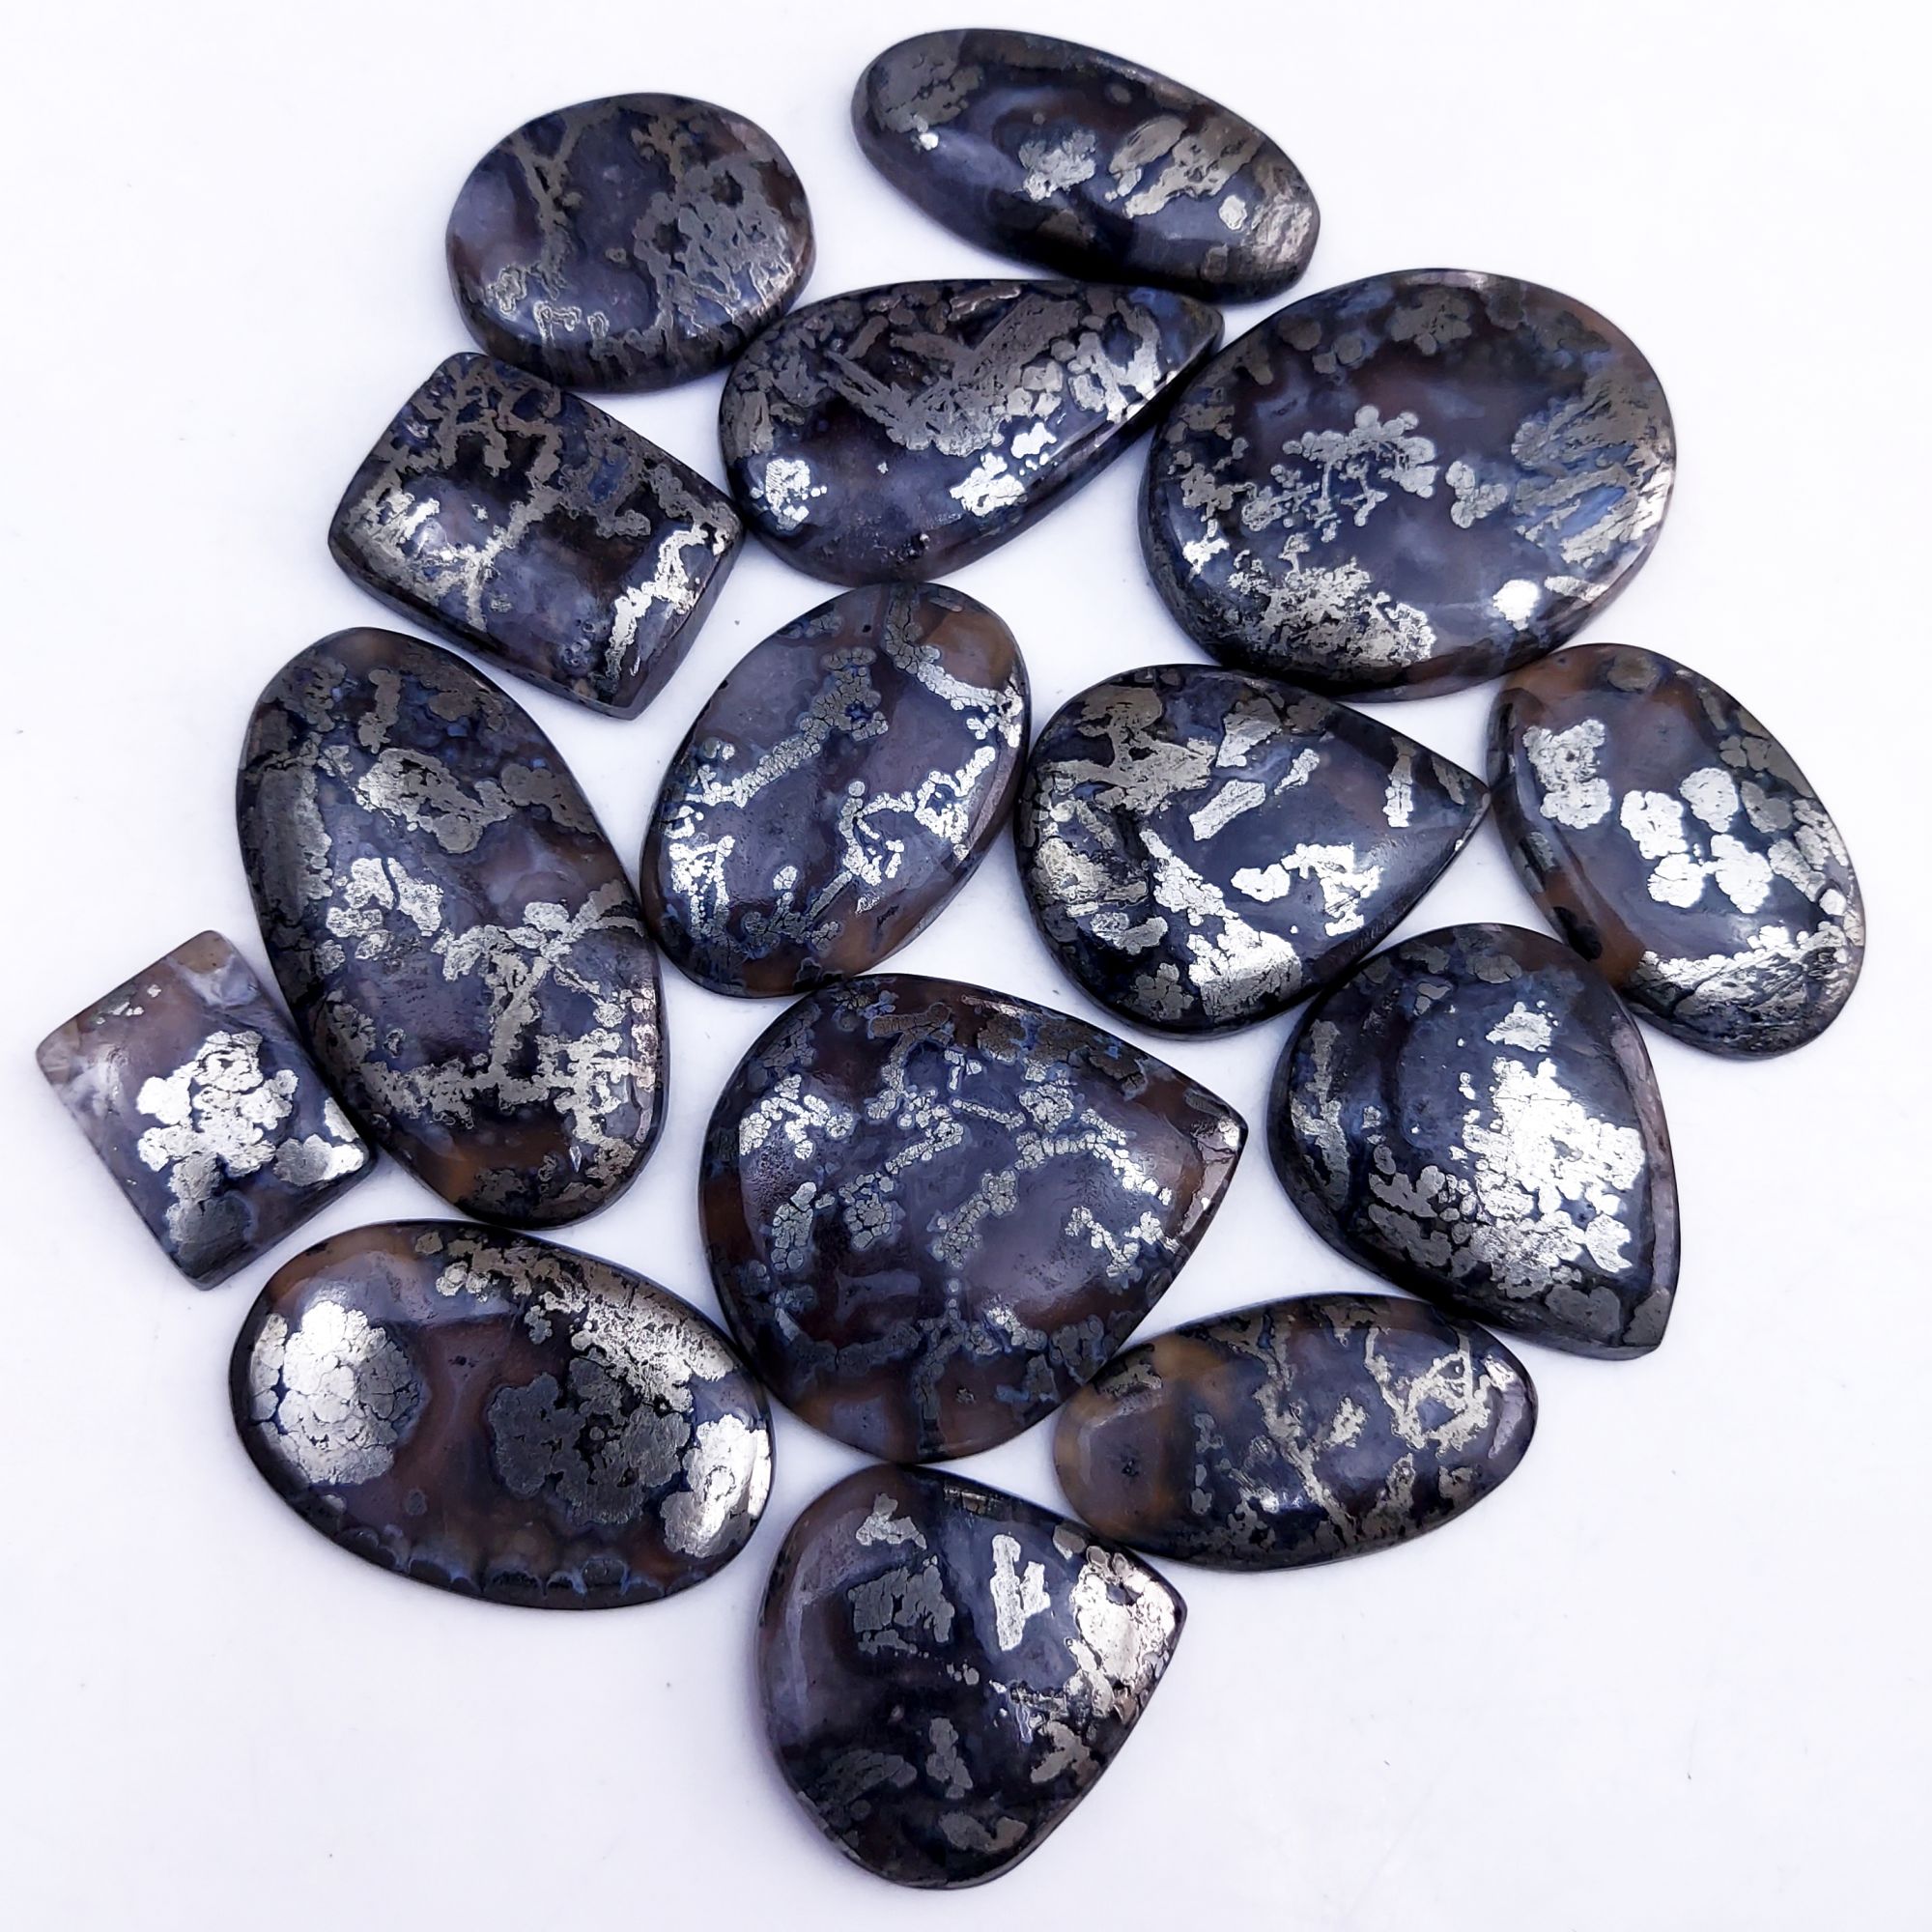 15Pcs 714Cts Natural Marcasite Grey Cabochon Back Side Unpolished Gemstone Semi-Precious Gemstones For Jewelry Making 44x24 20x15mm #10044